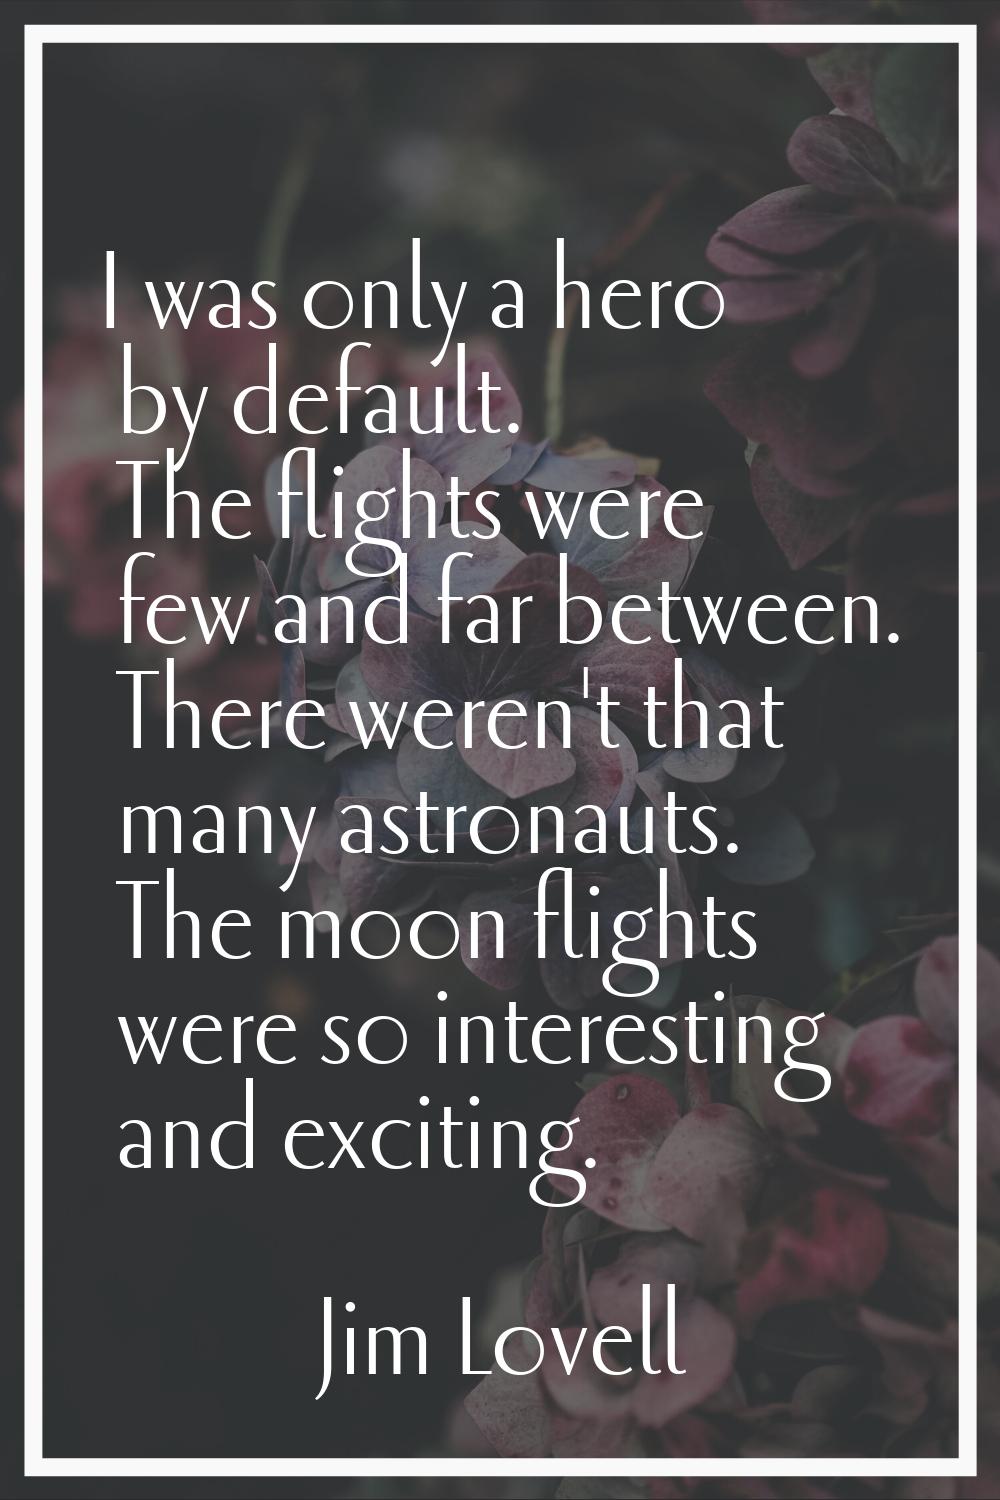 I was only a hero by default. The flights were few and far between. There weren't that many astrona